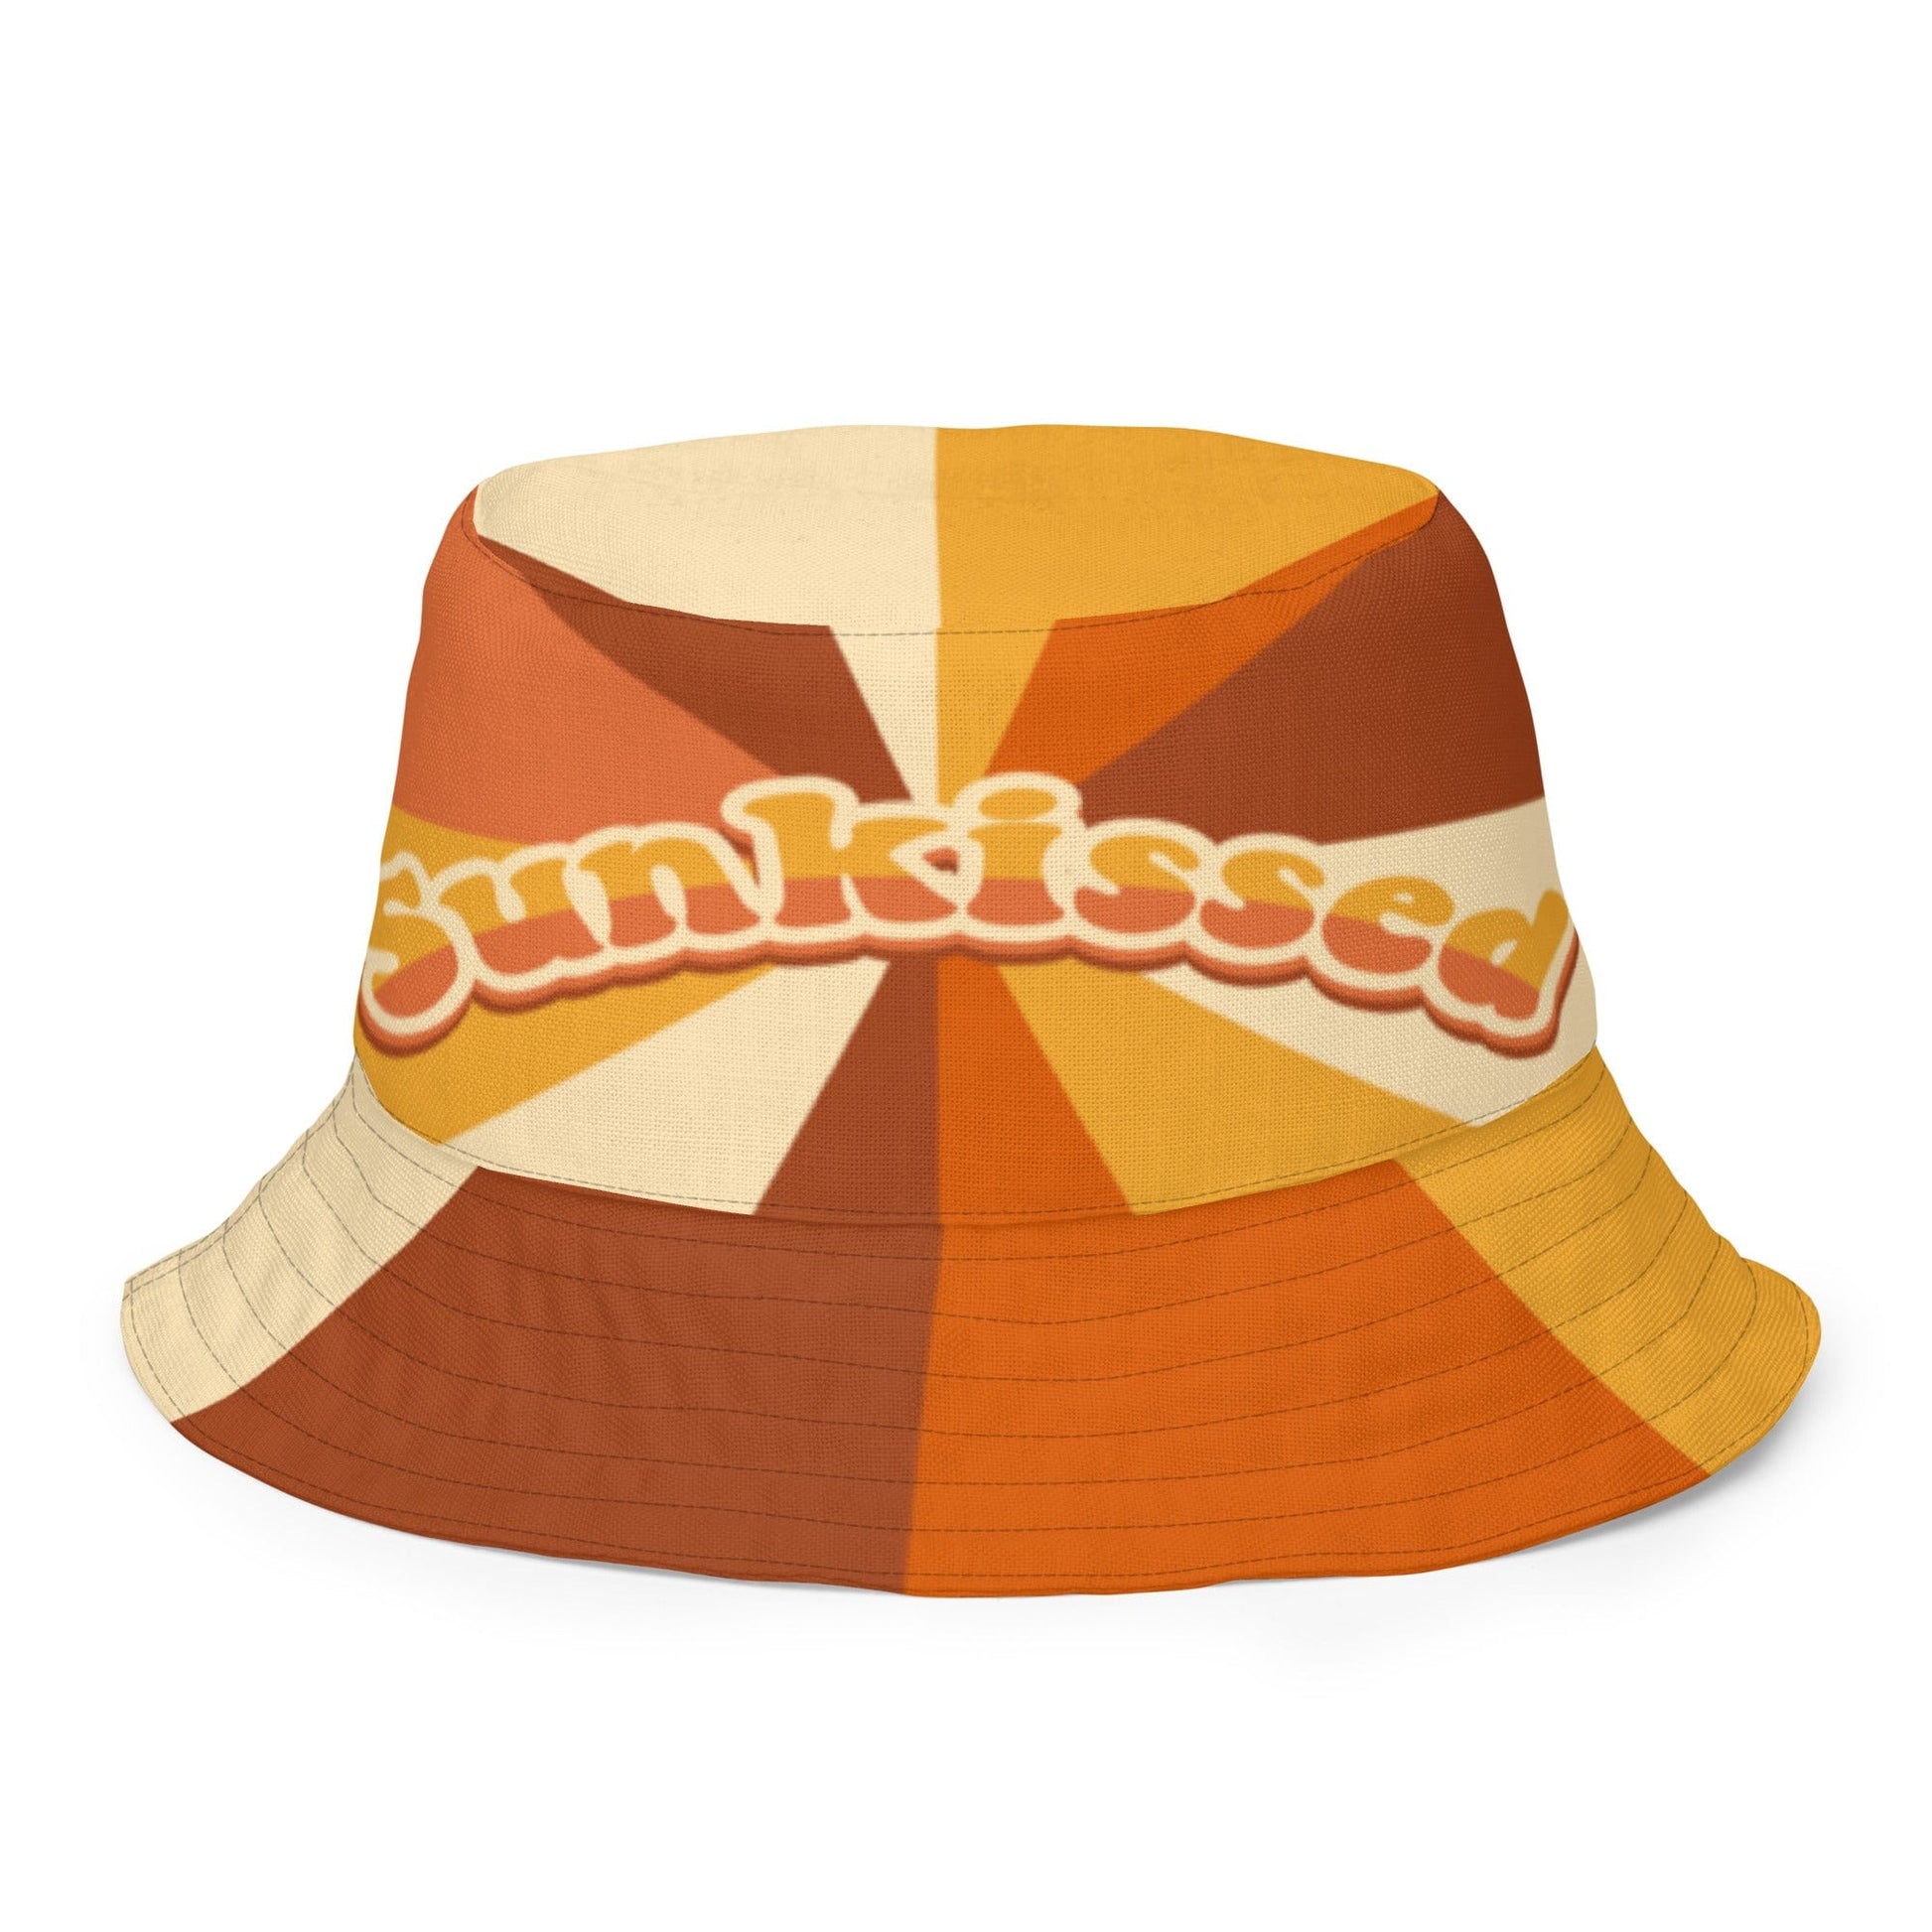 Kate McEnroe New York 70s Groovy Hippie Sunkissed Reversible Bucket Hat Hats L/XL 63C775721B24A_16361